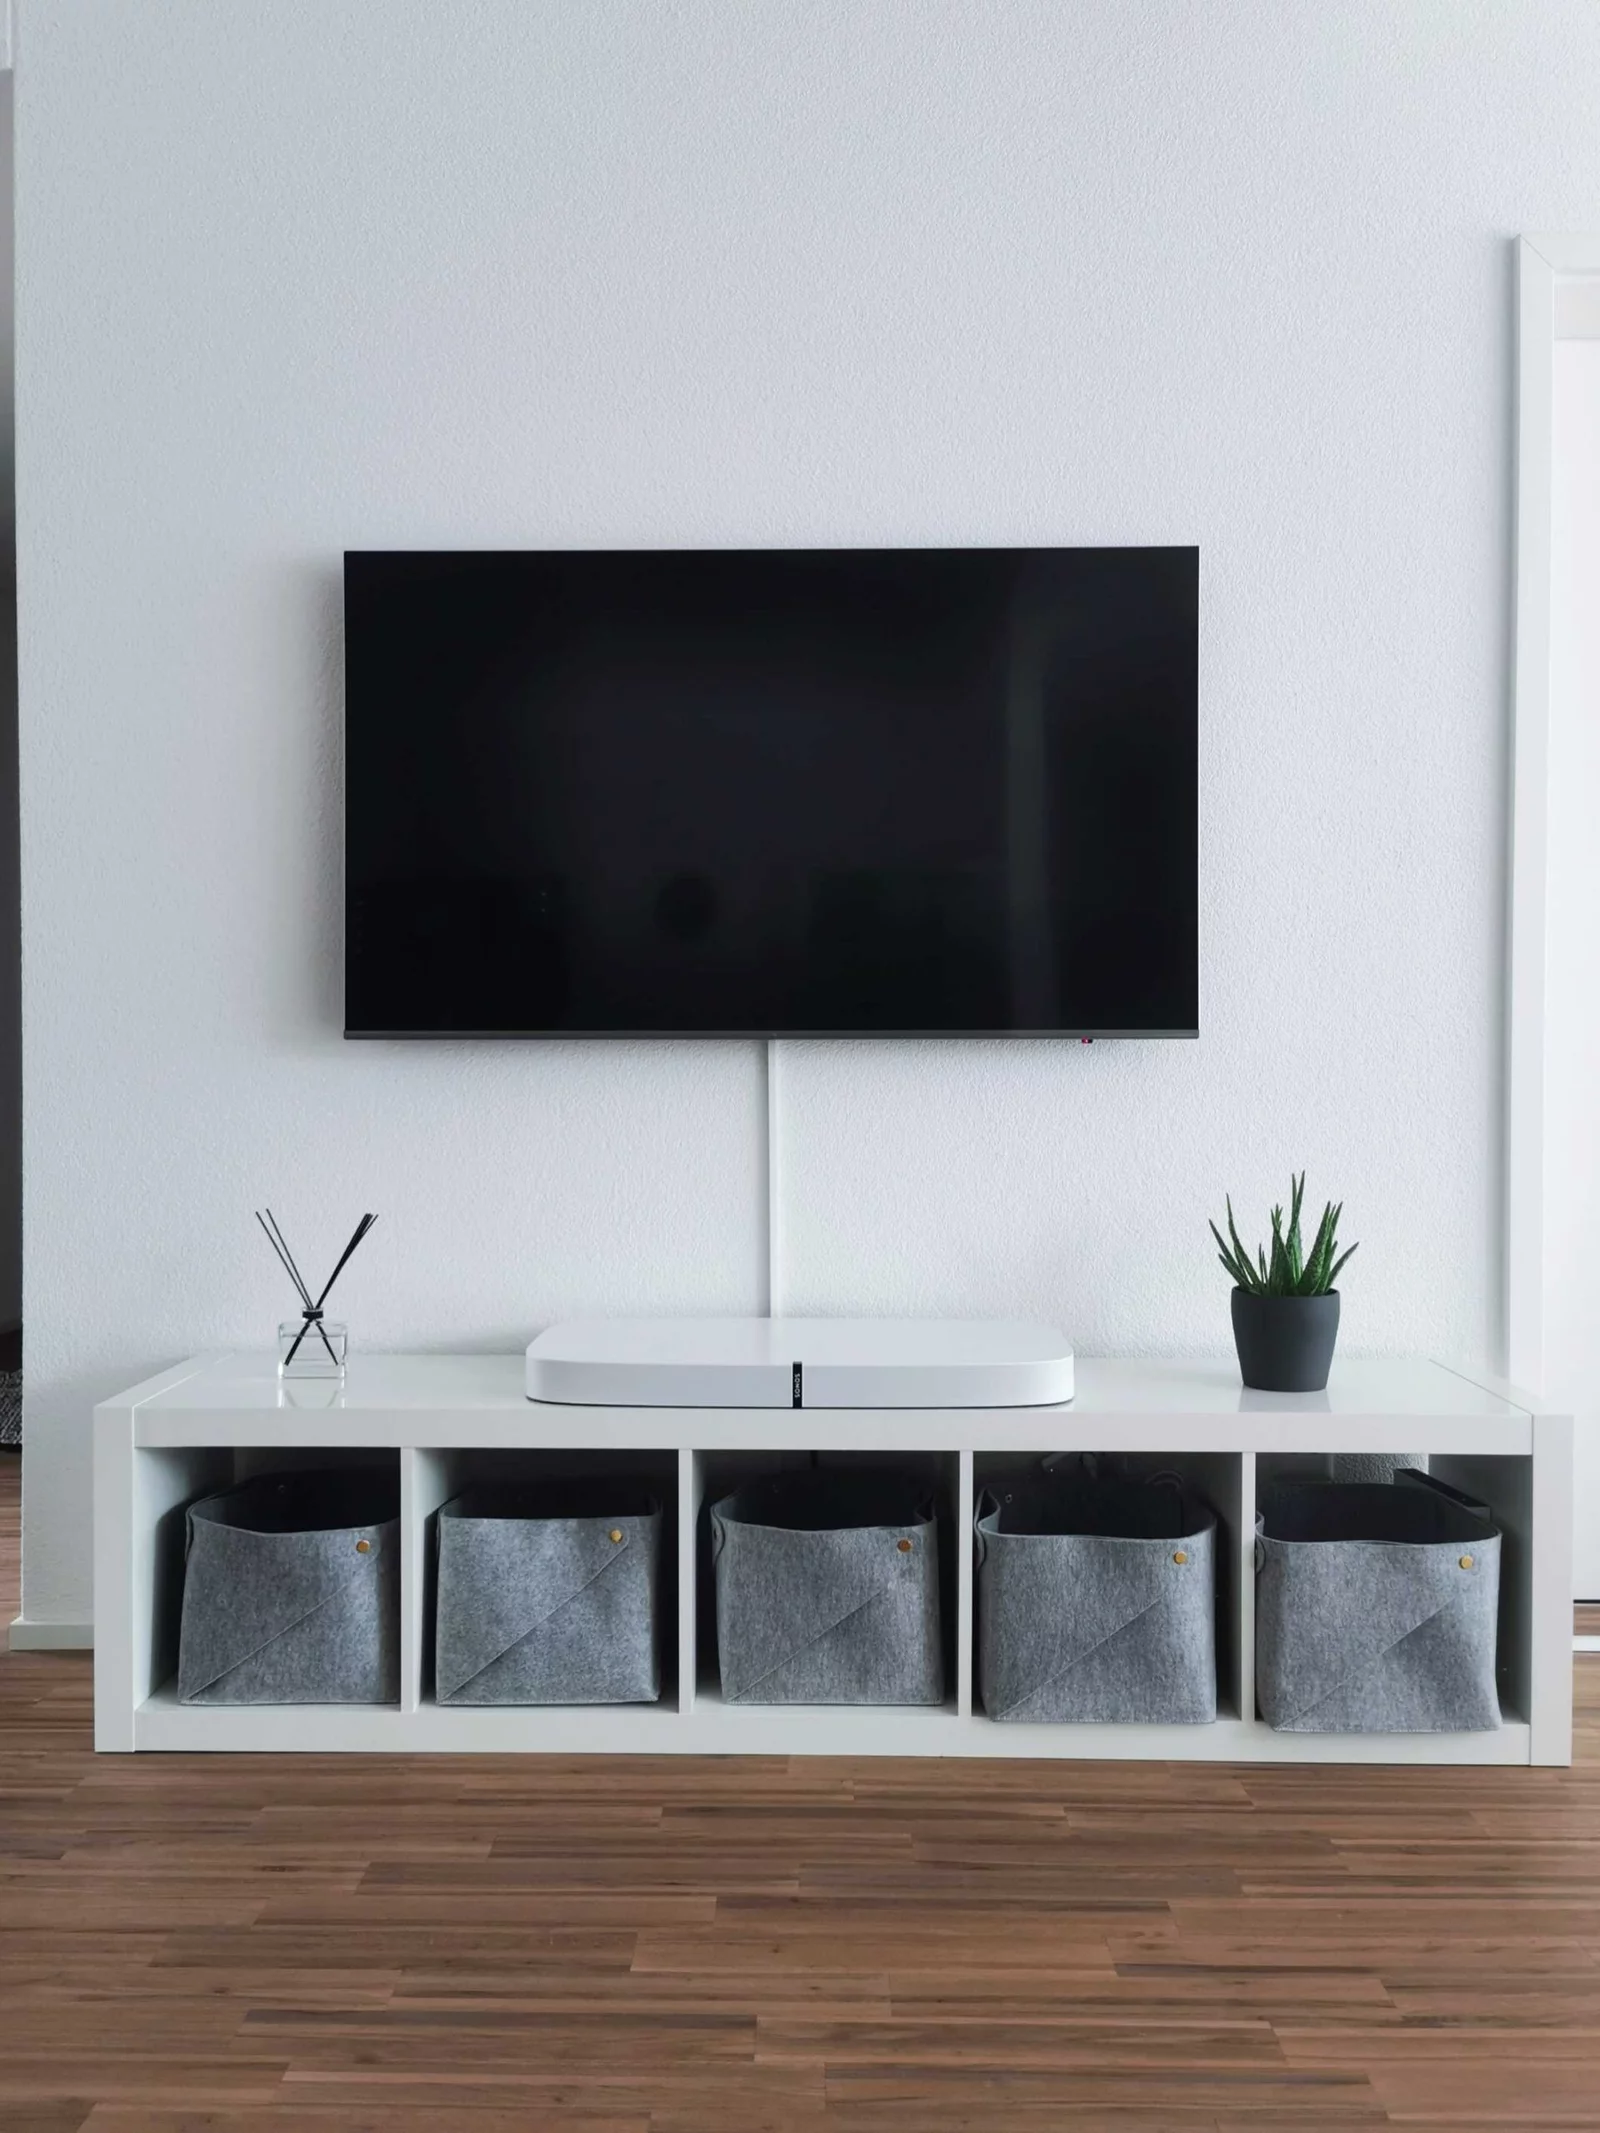 How to Safely and Effectively Clean Your Flat Screen TV